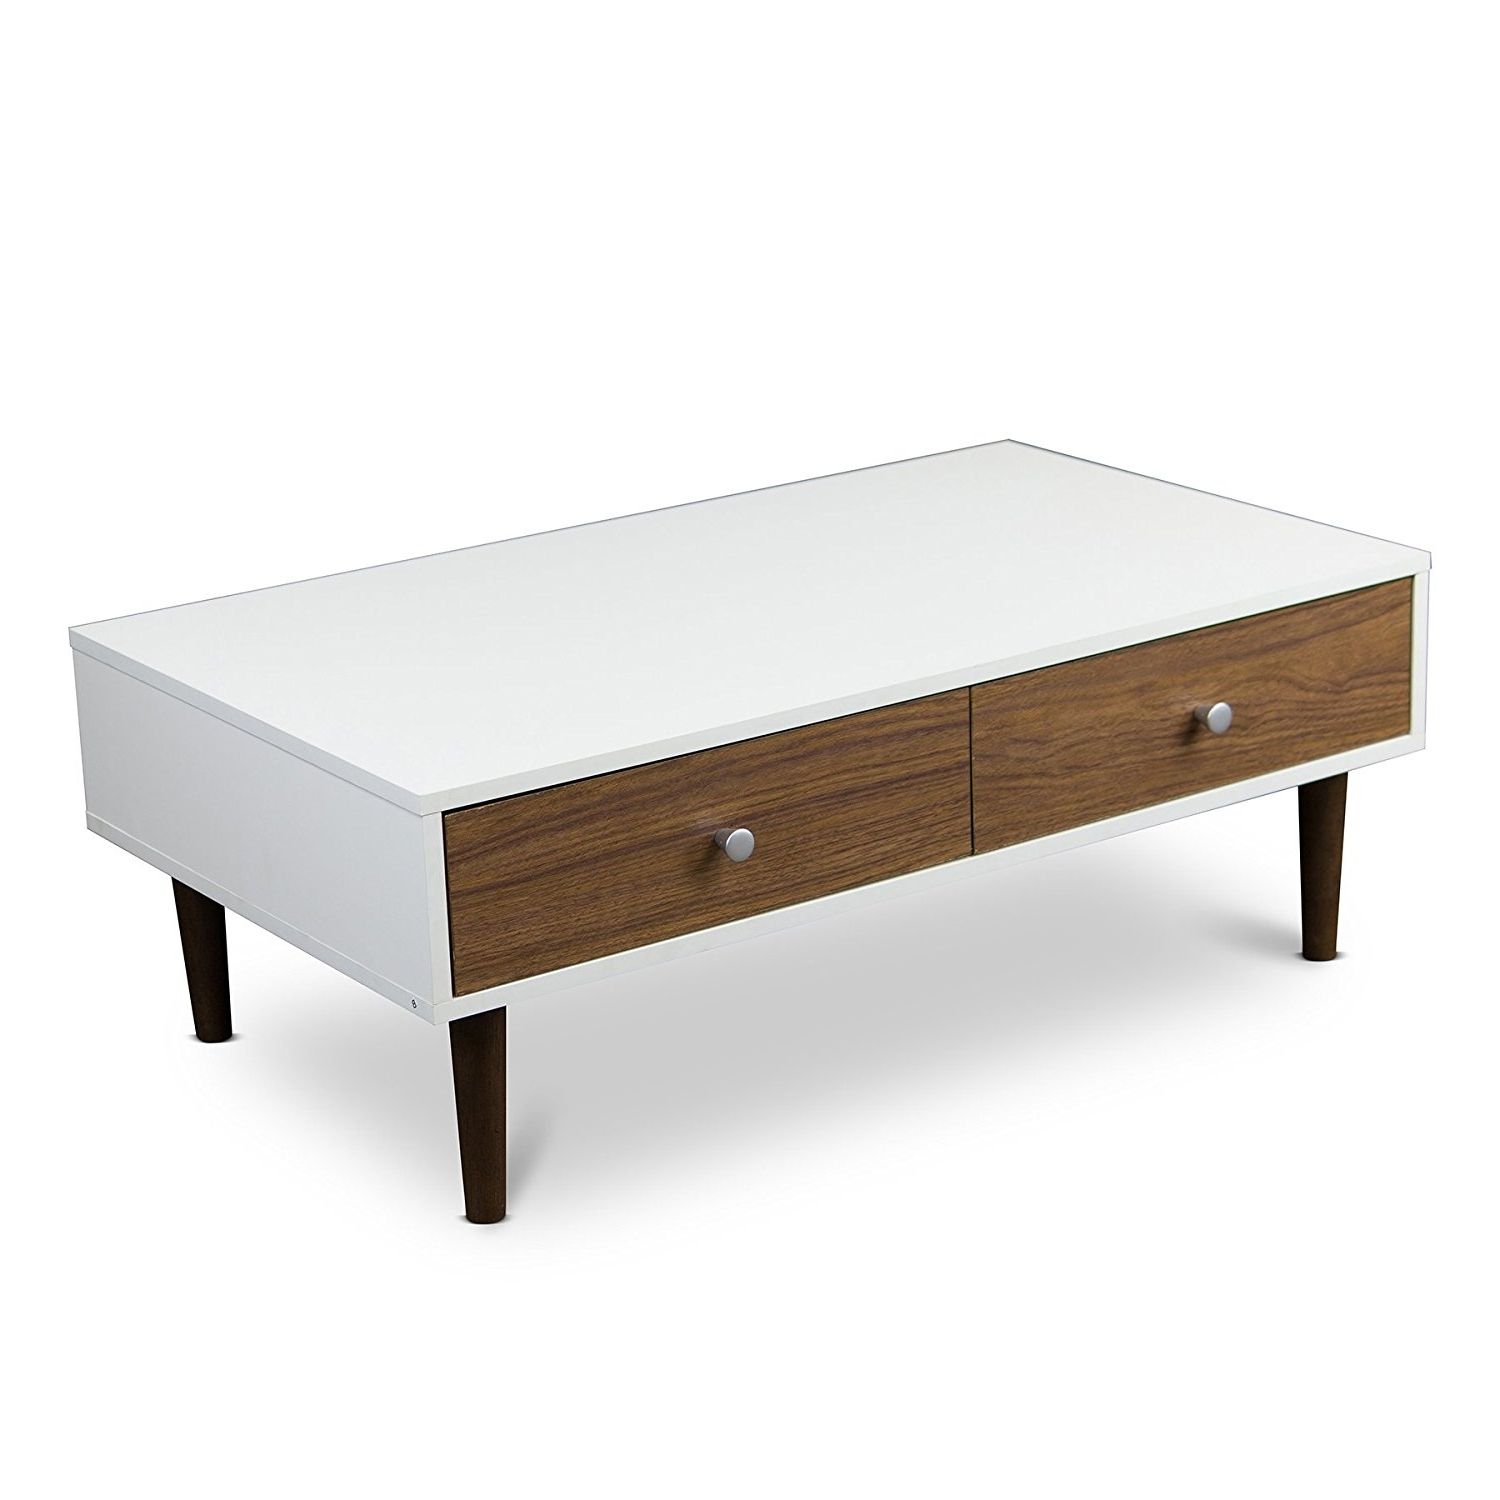 Latest Design White High Gloss Mdf Storage Coffee Table For Sale In Most Up To Date Stack Hi Gloss Wood Coffee Tables (View 18 of 20)